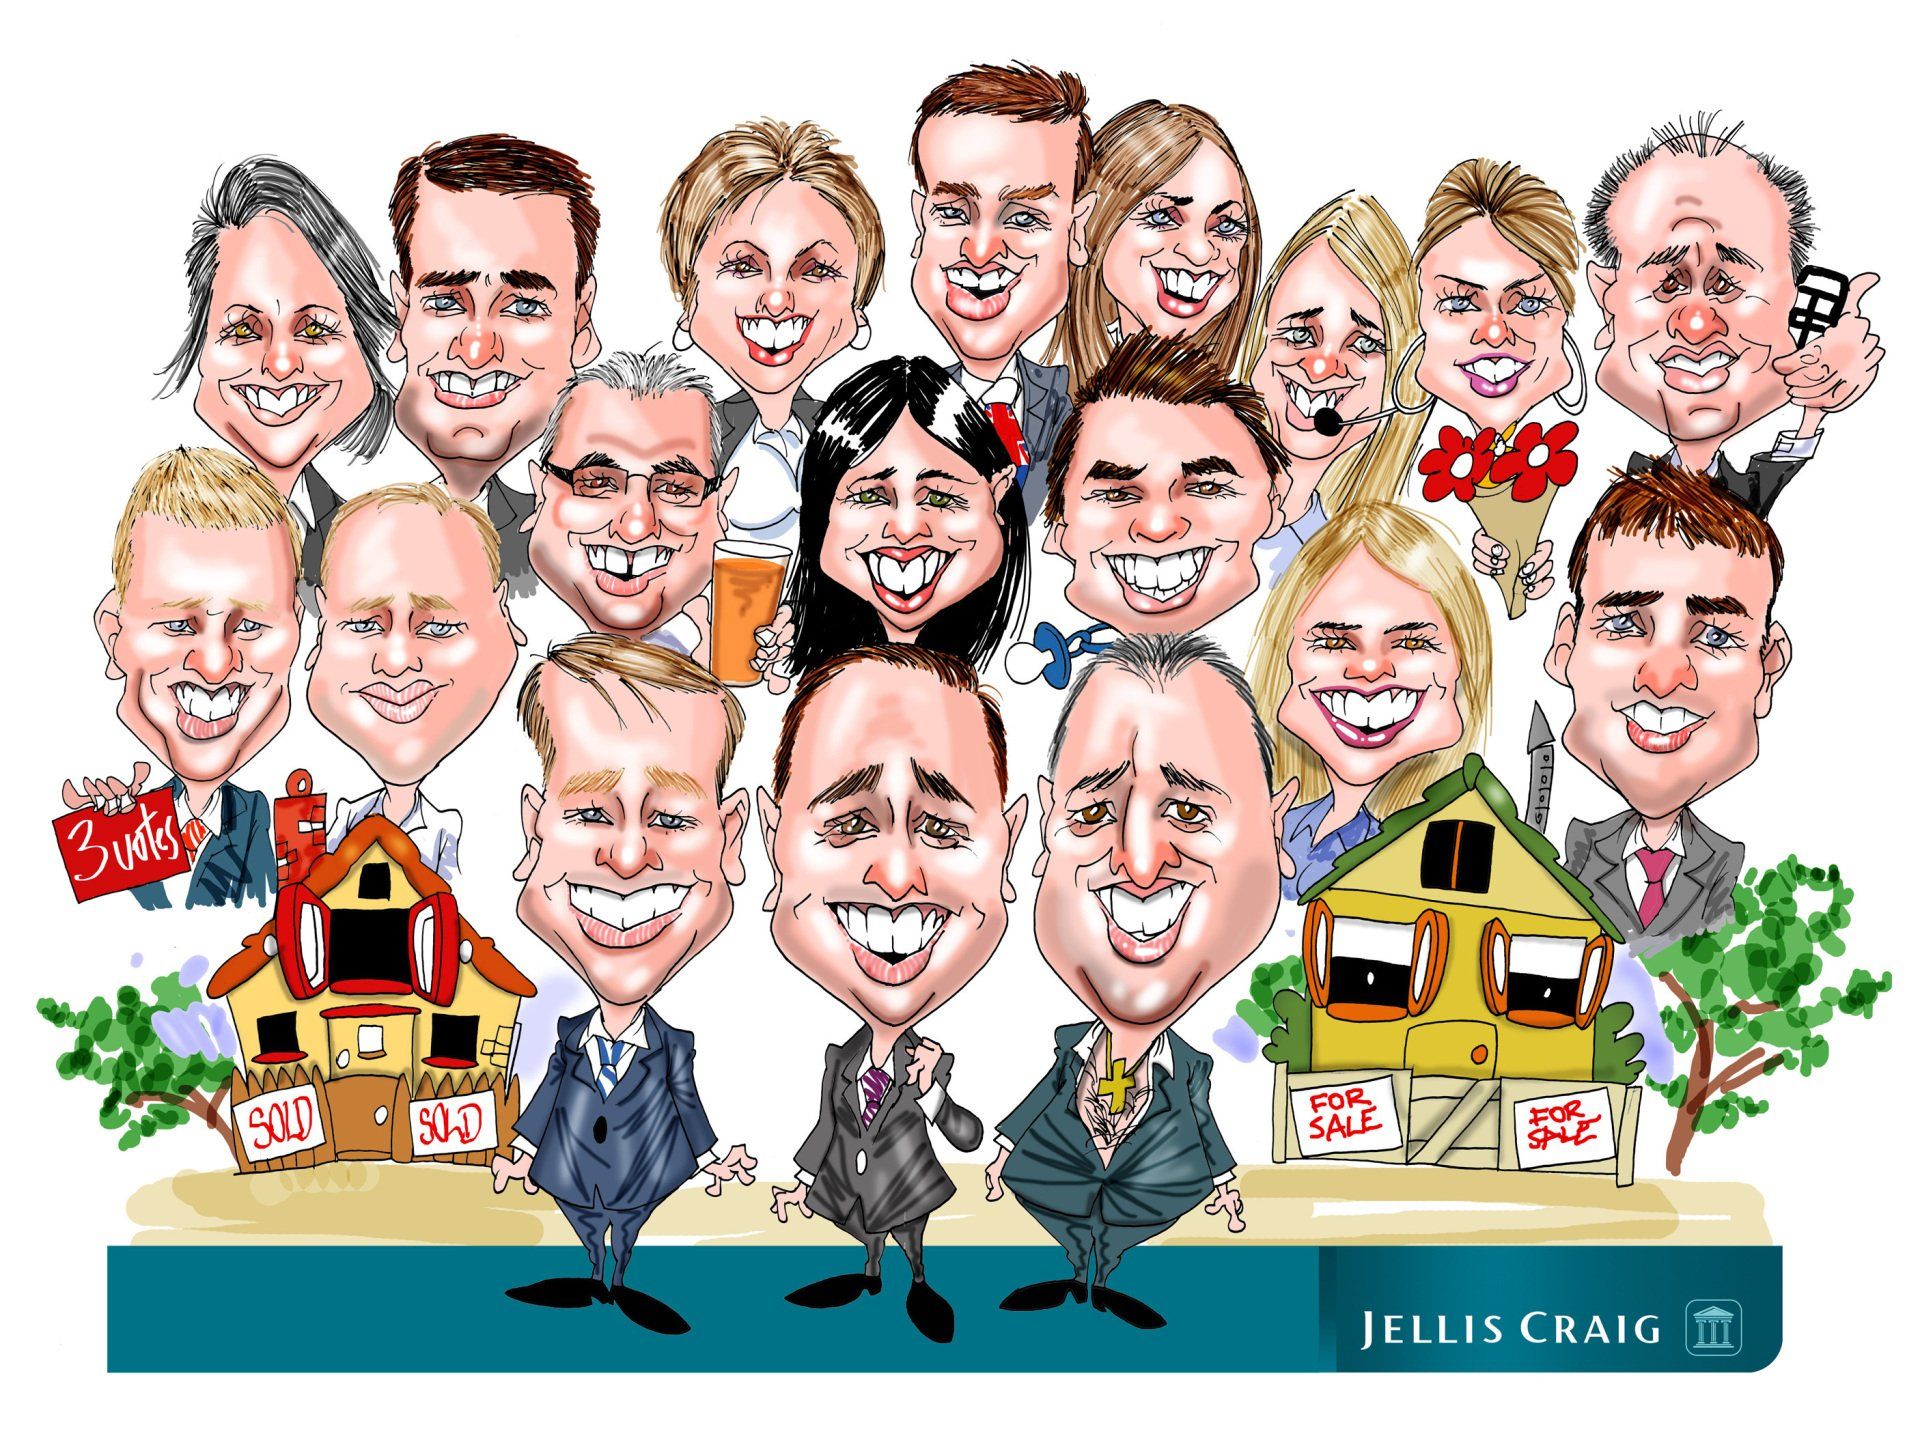 Corporate Caricature here online Caricatures from photos are all original caricature artworks drawn by corporate cartoonist David Green